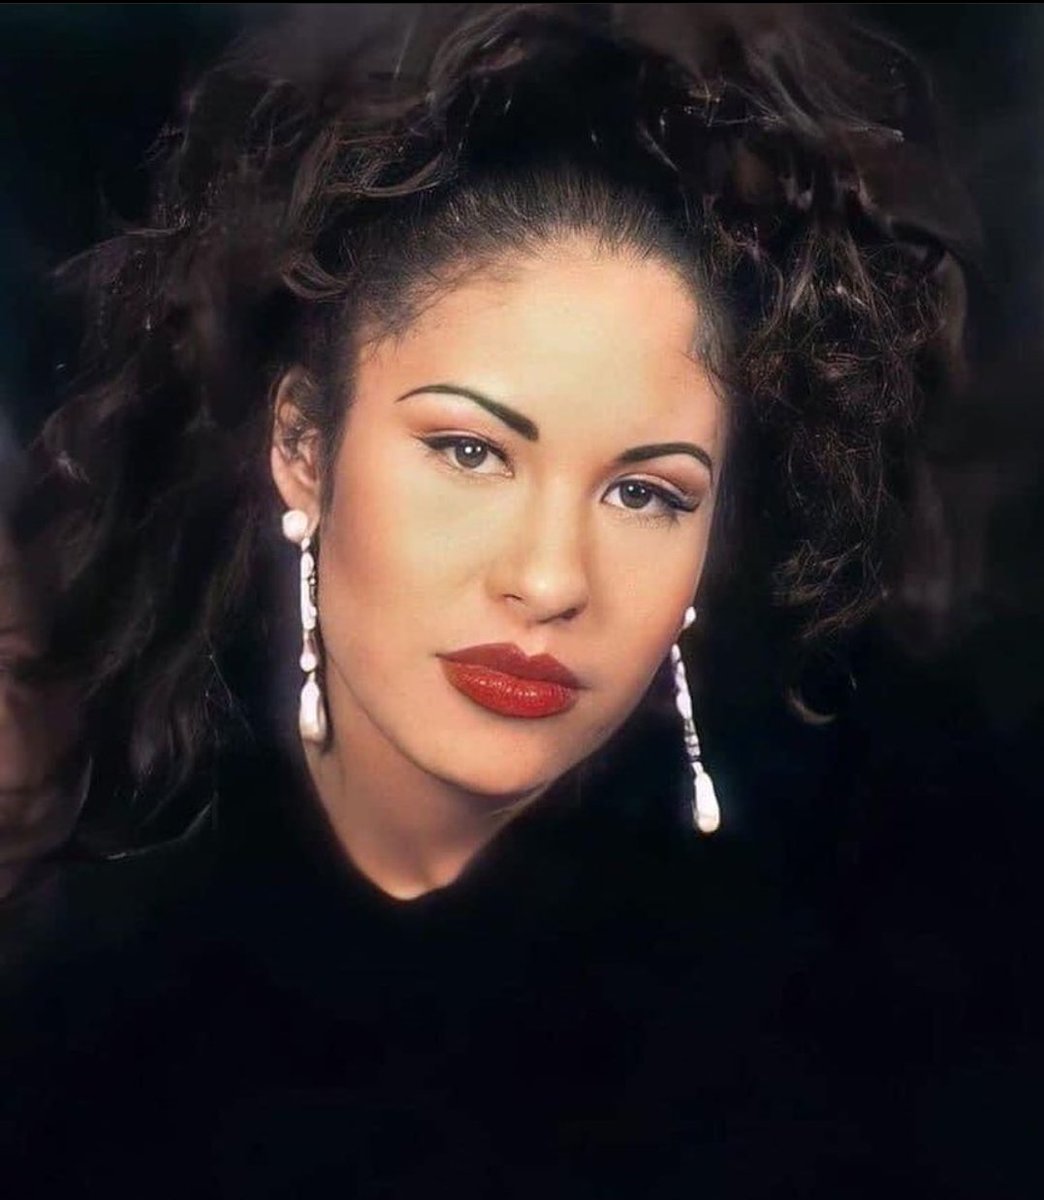 “Always believe that the impossible is always possible.” – Selena Quintanilla . https://t.co/AHVIROCp8b